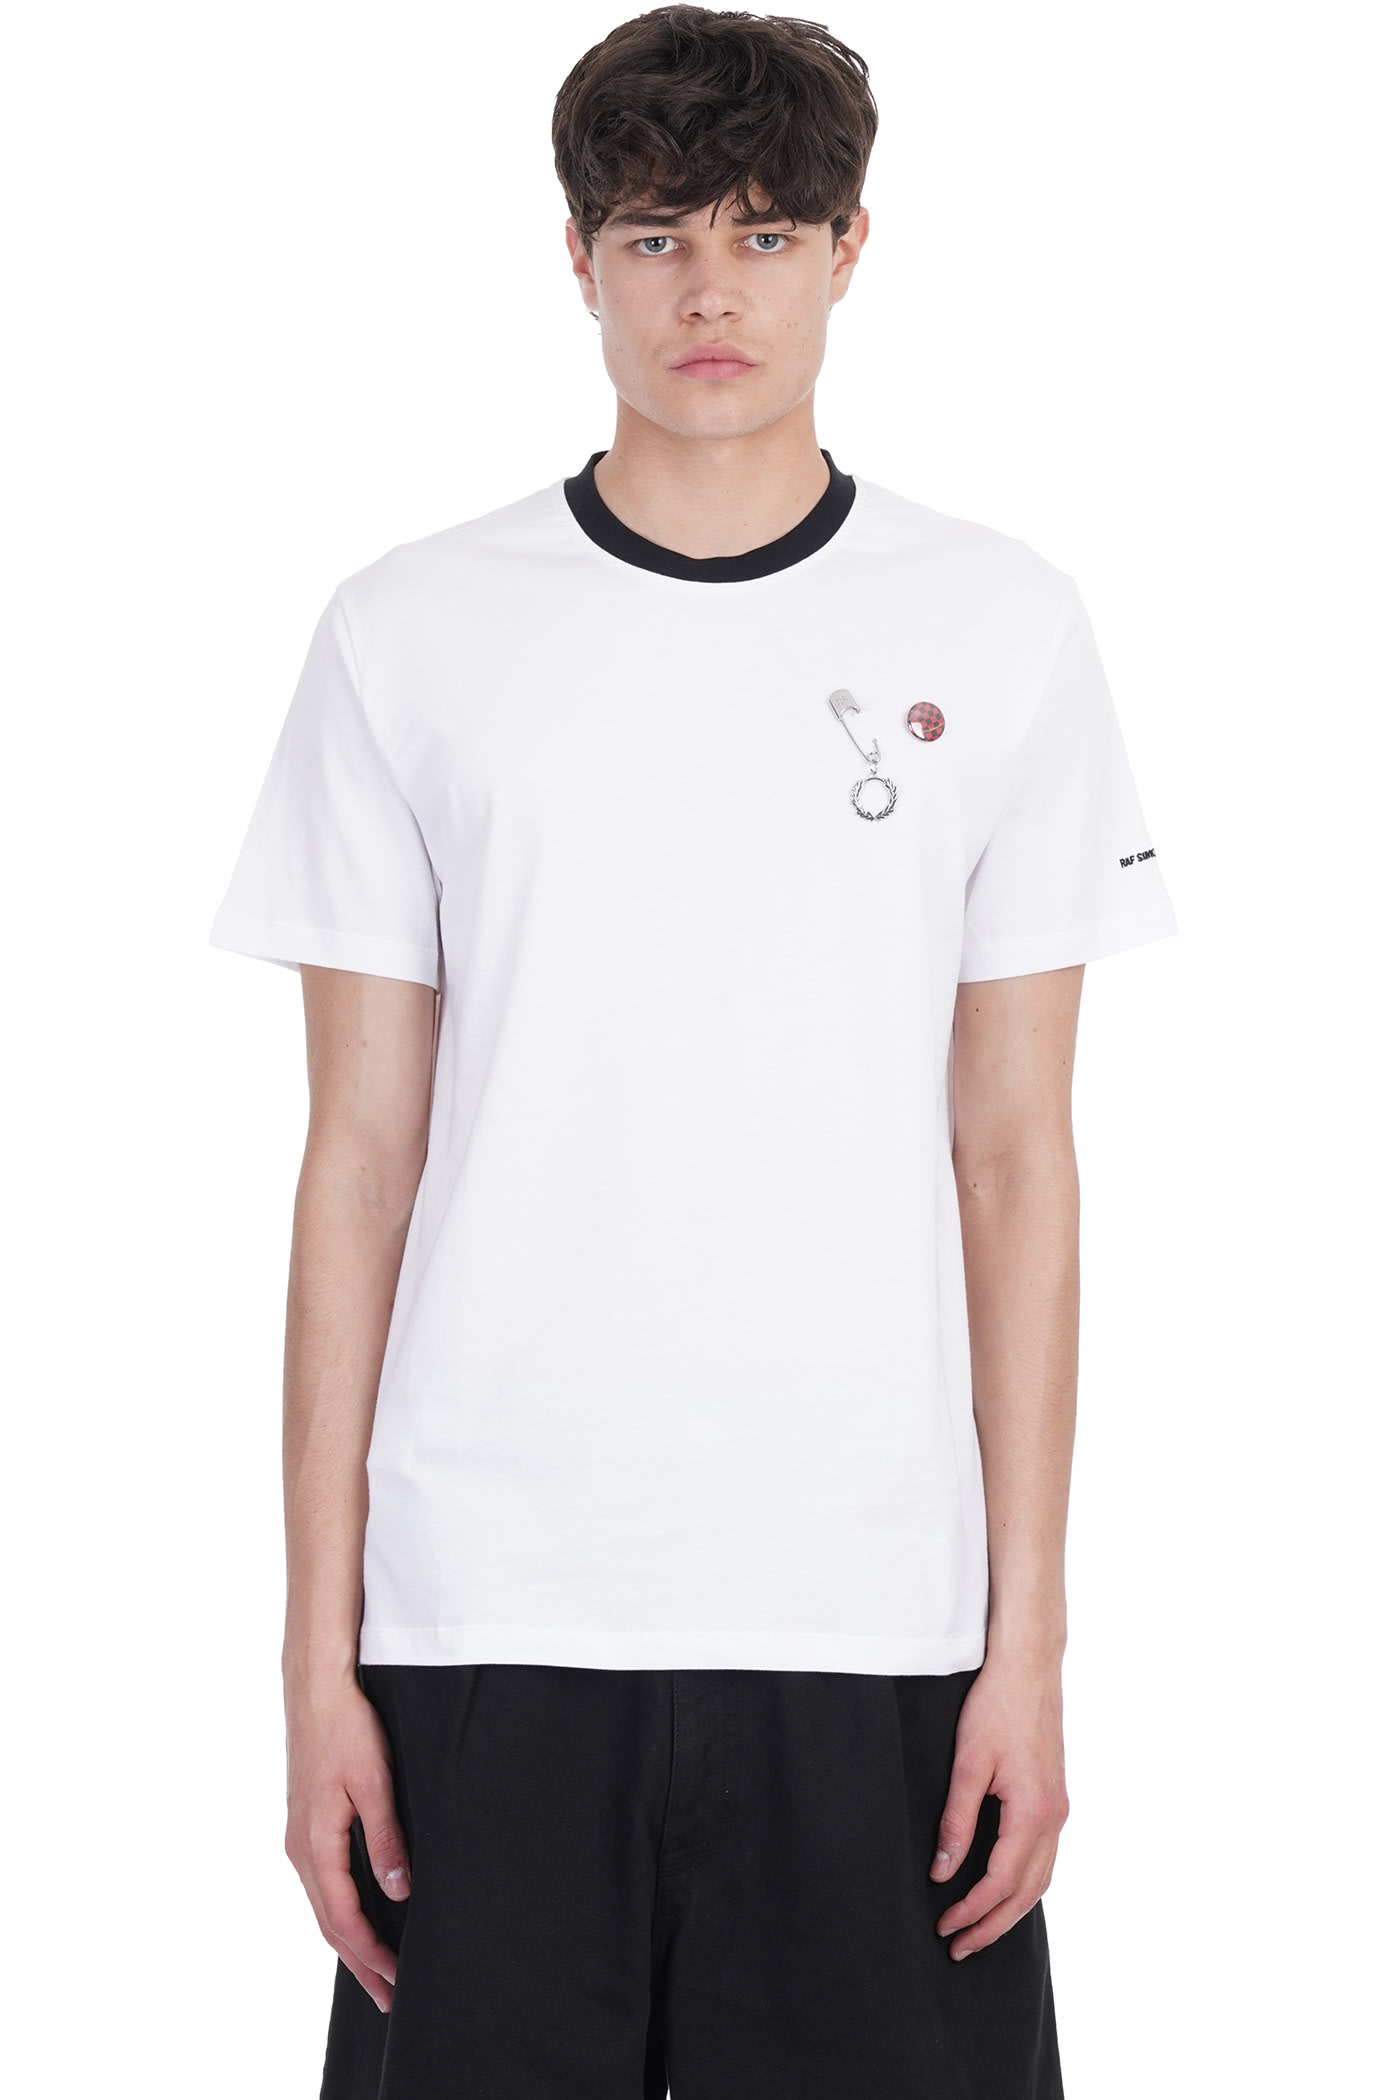 FRED PERRY T-SHIRT IN WHITE COTTON